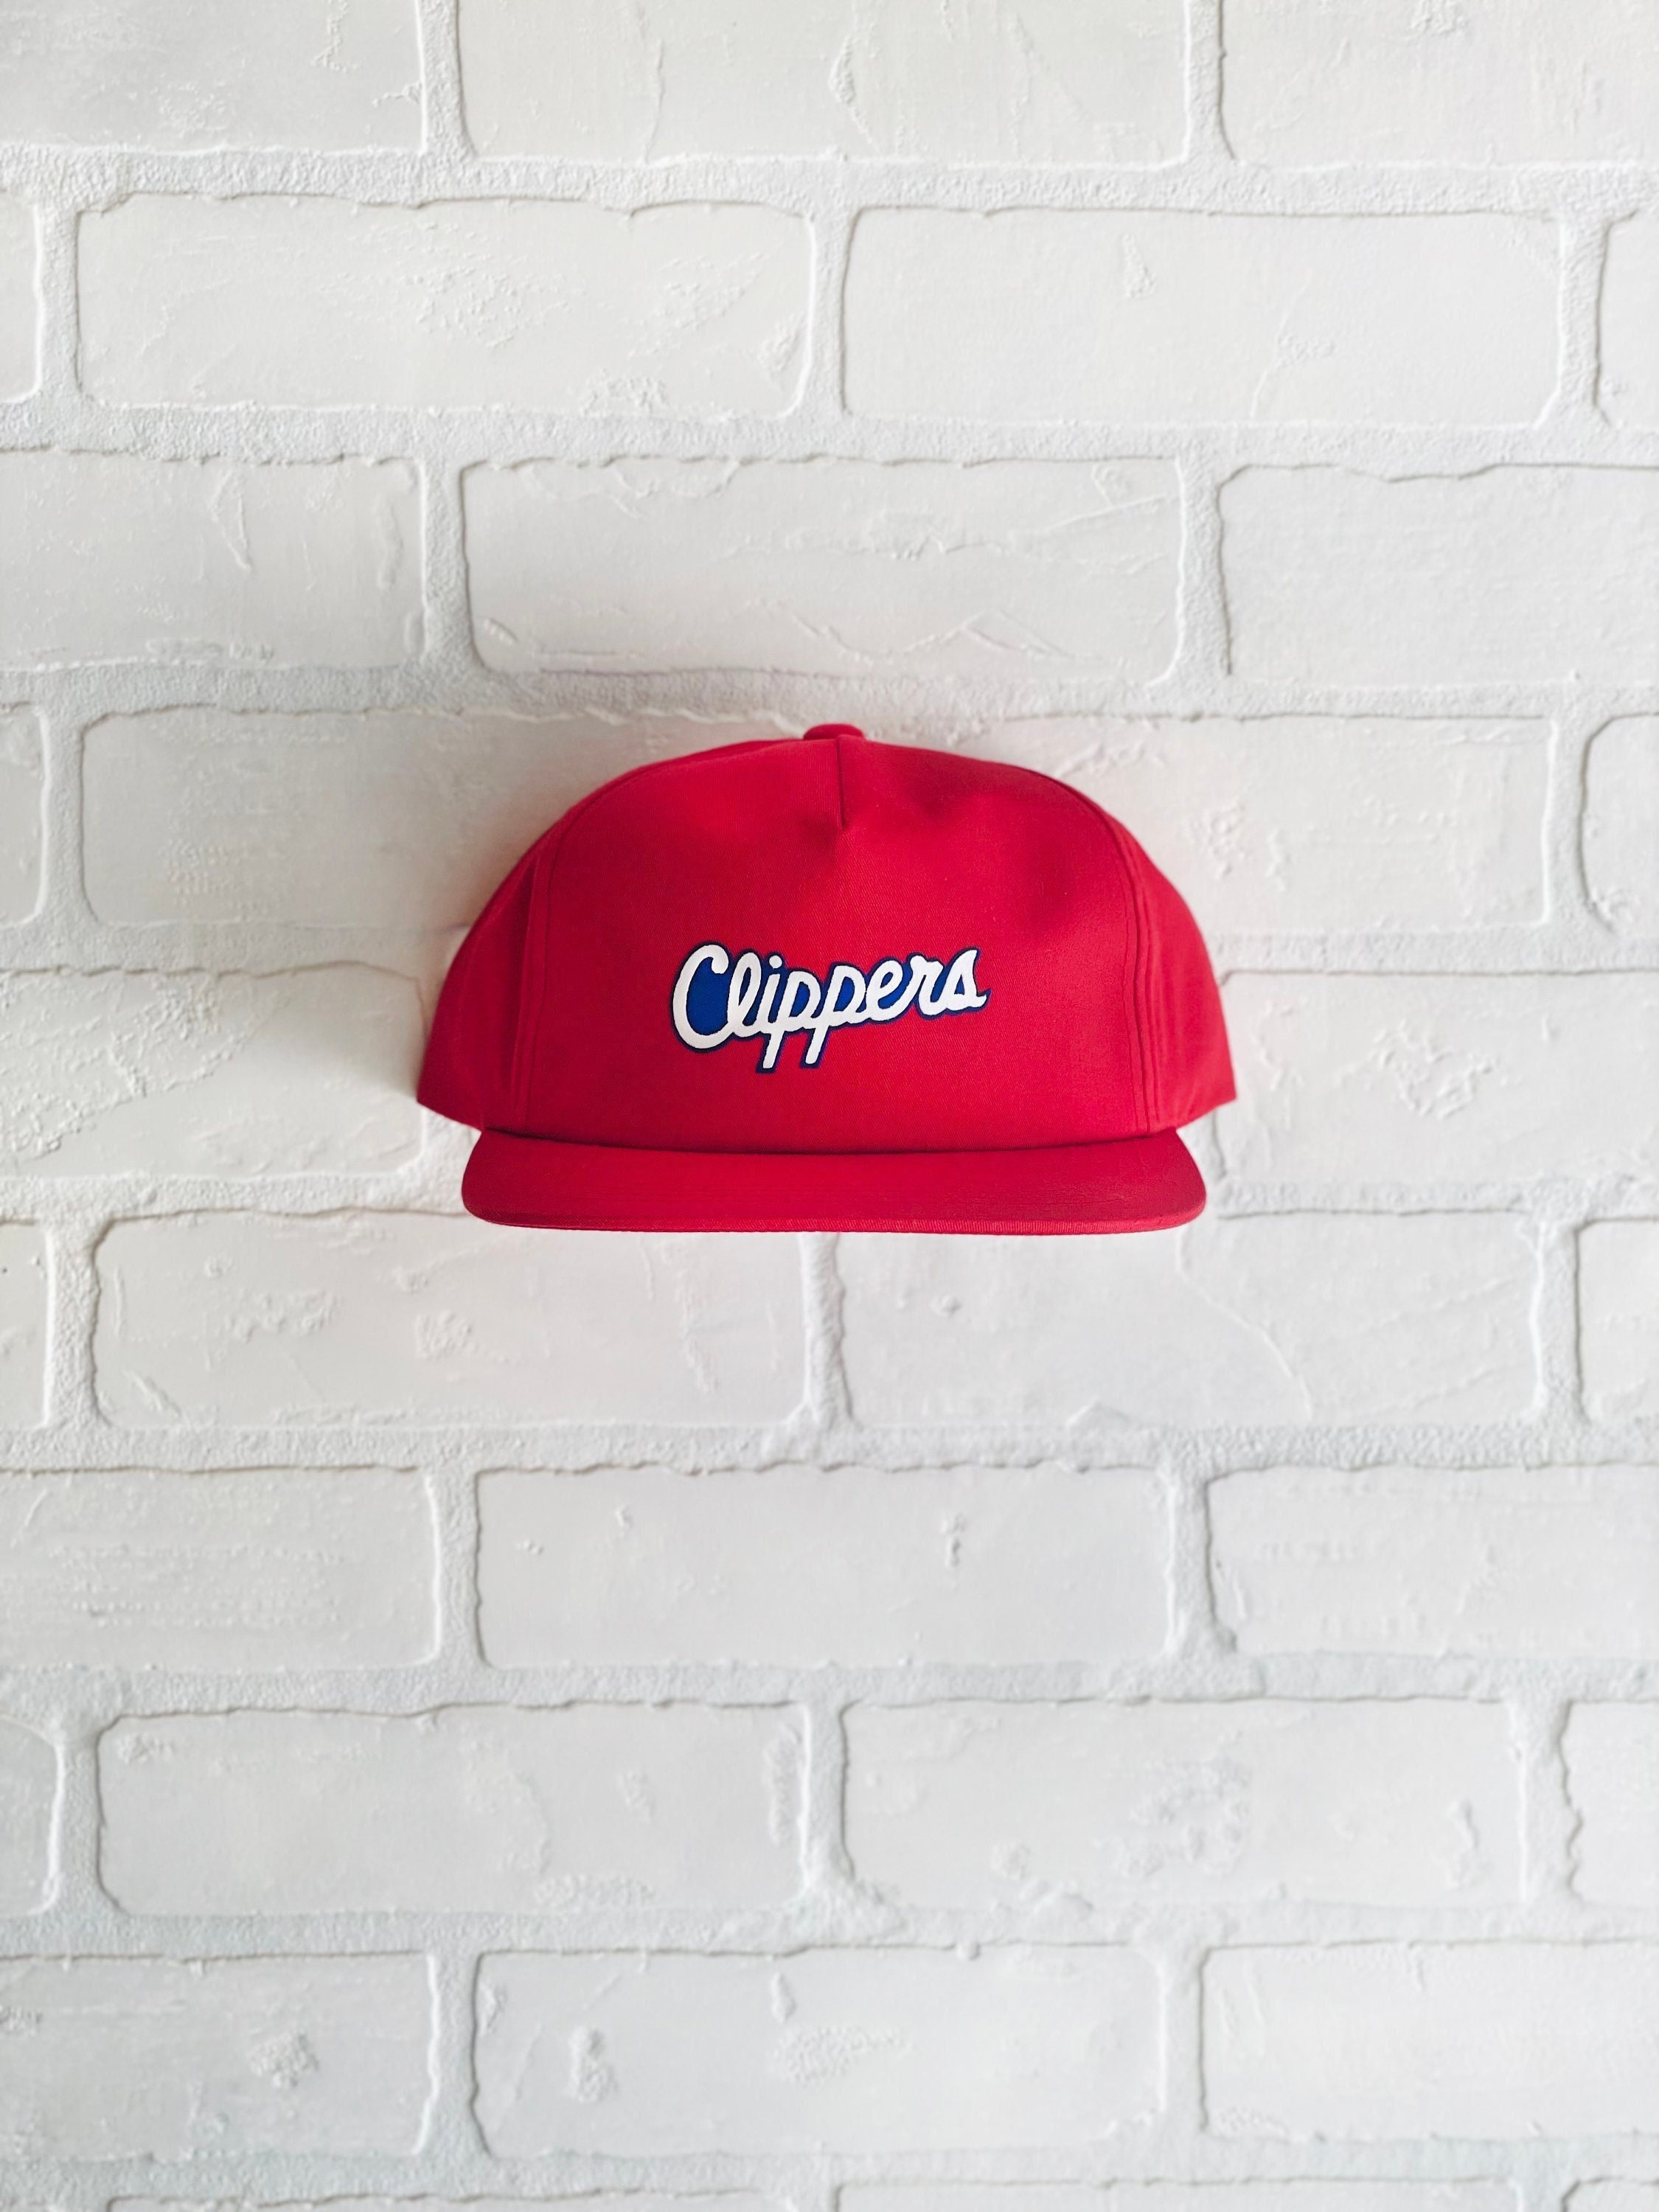 NEW Vintage Limited 1169/2000 Los Angeles Clippers NBA Hat – Twisted Thrift